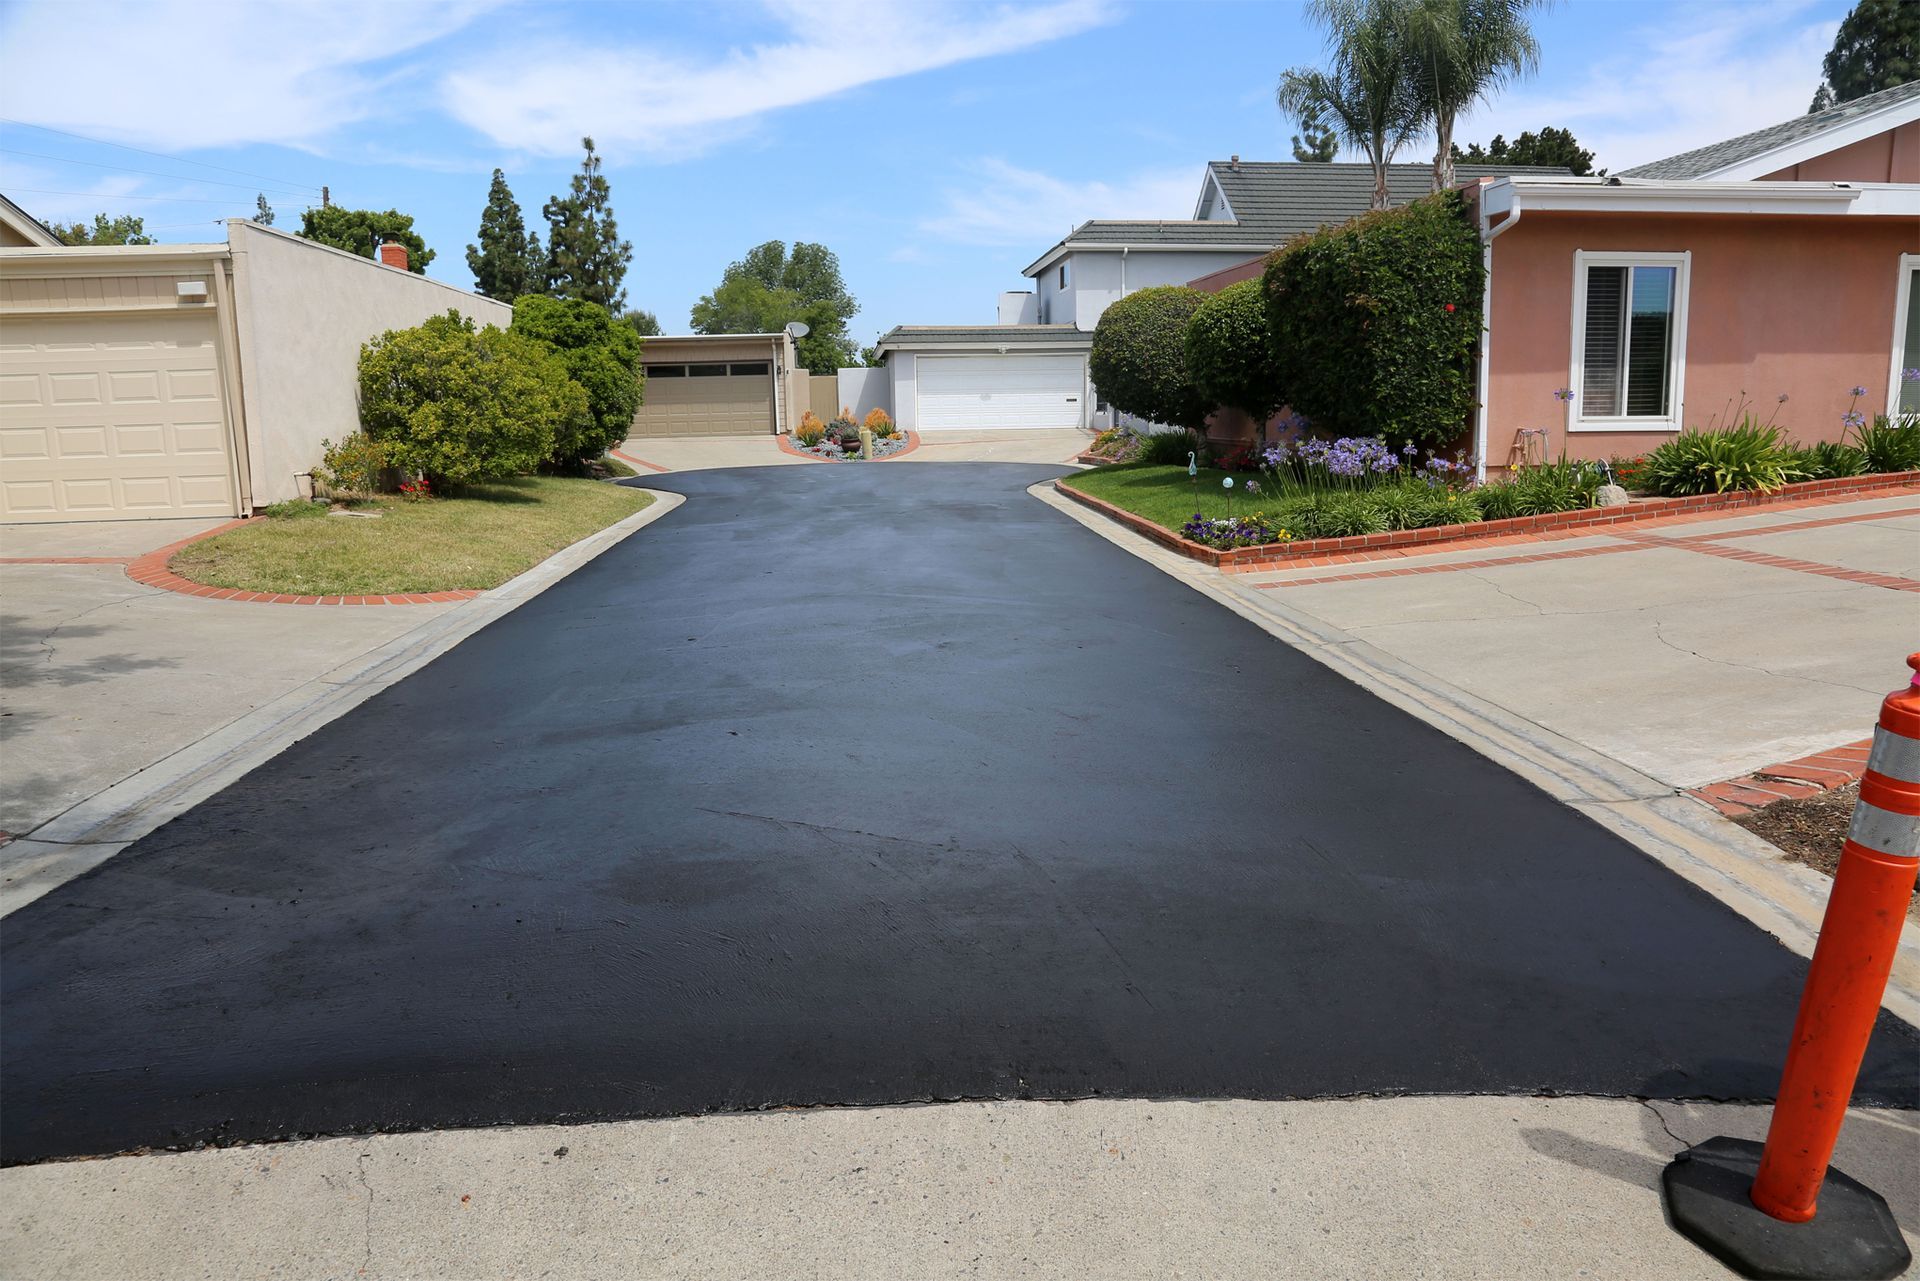 a newly paved driveway in a residential neighborhood